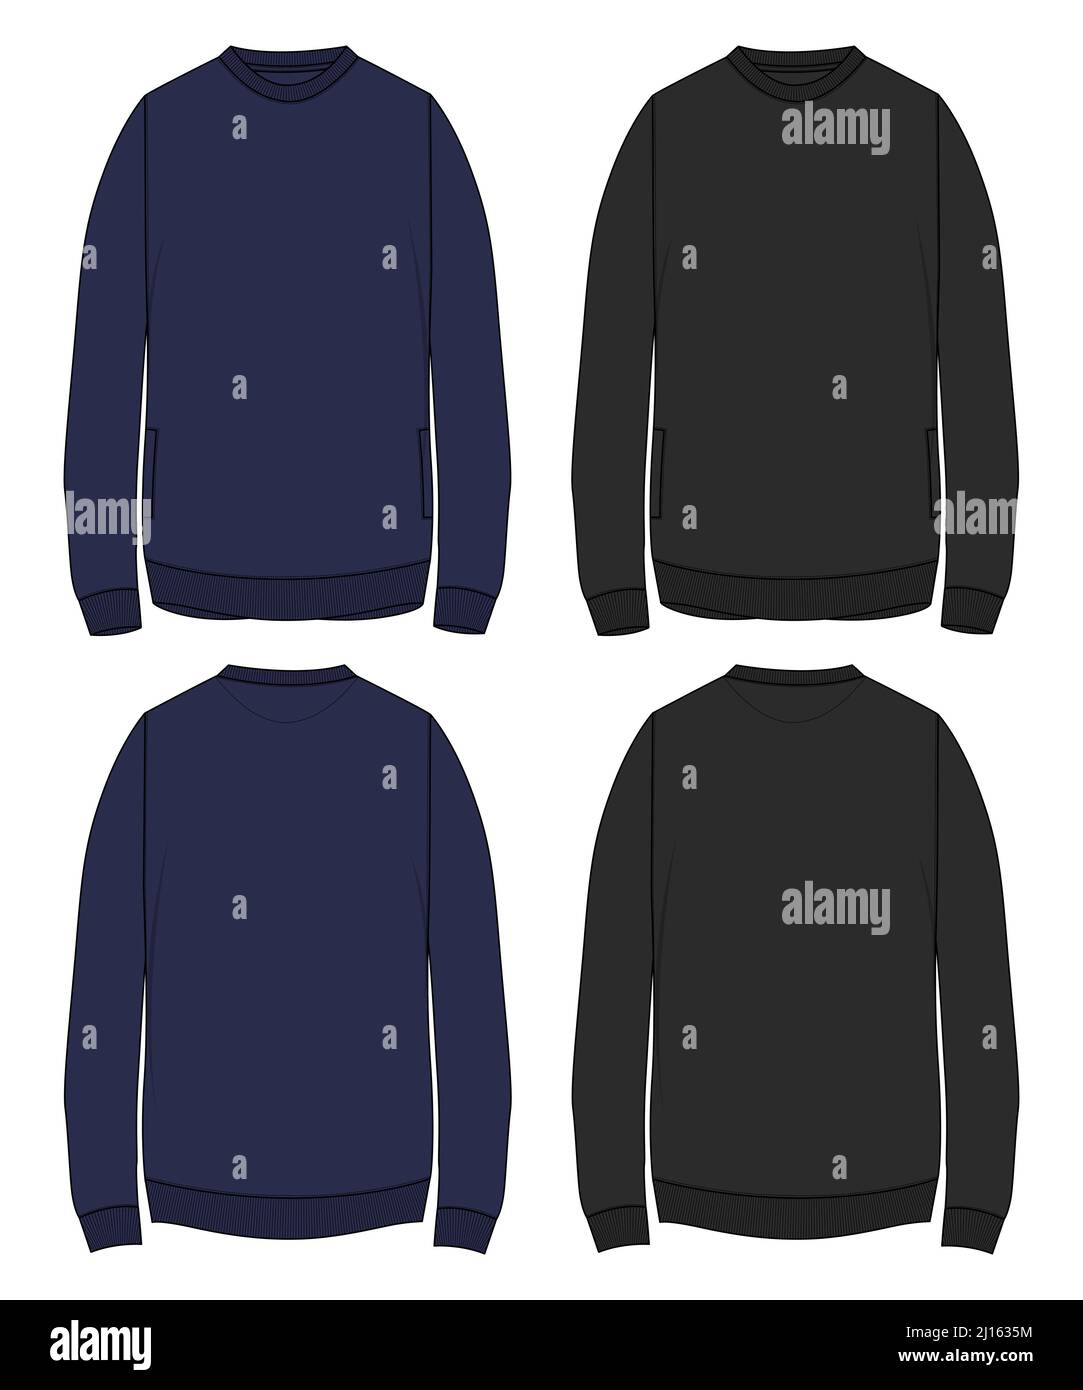 Slim fit Round neck Long sleeve Sweatshirt technical fashion Flats Sketches drawing vector template For men's. Apparel design black, Navy Color mock u Stock Vector